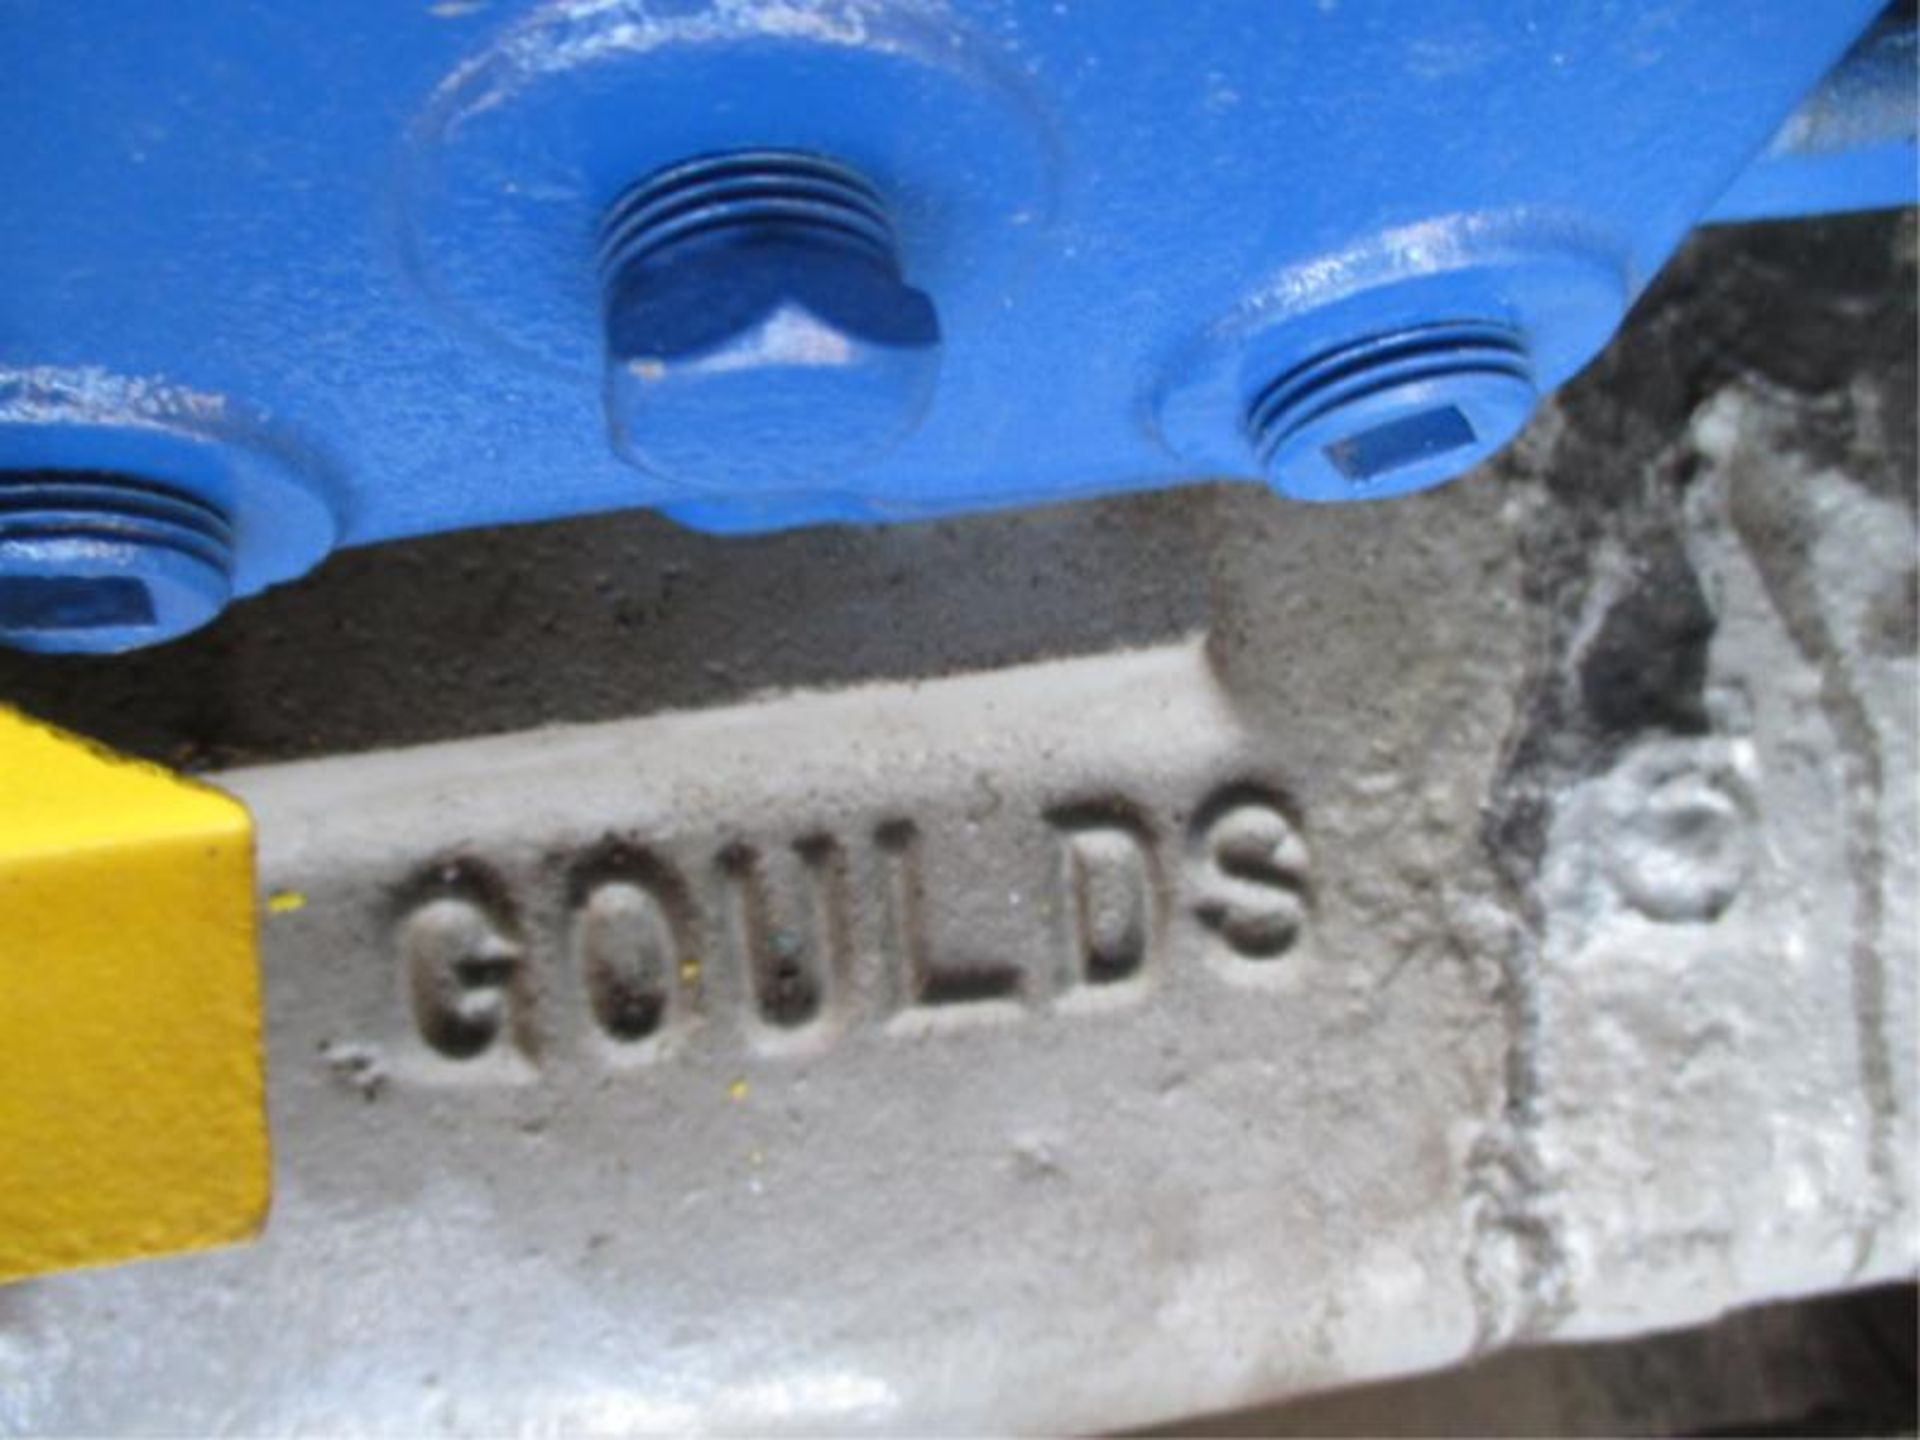 Gould Pump w/ Stainless Steel End, 3" Inlet, 1 1/2" Exit, 7.5 HP, Ph 3, Cycles: 60, RPM 3500 - Image 4 of 4